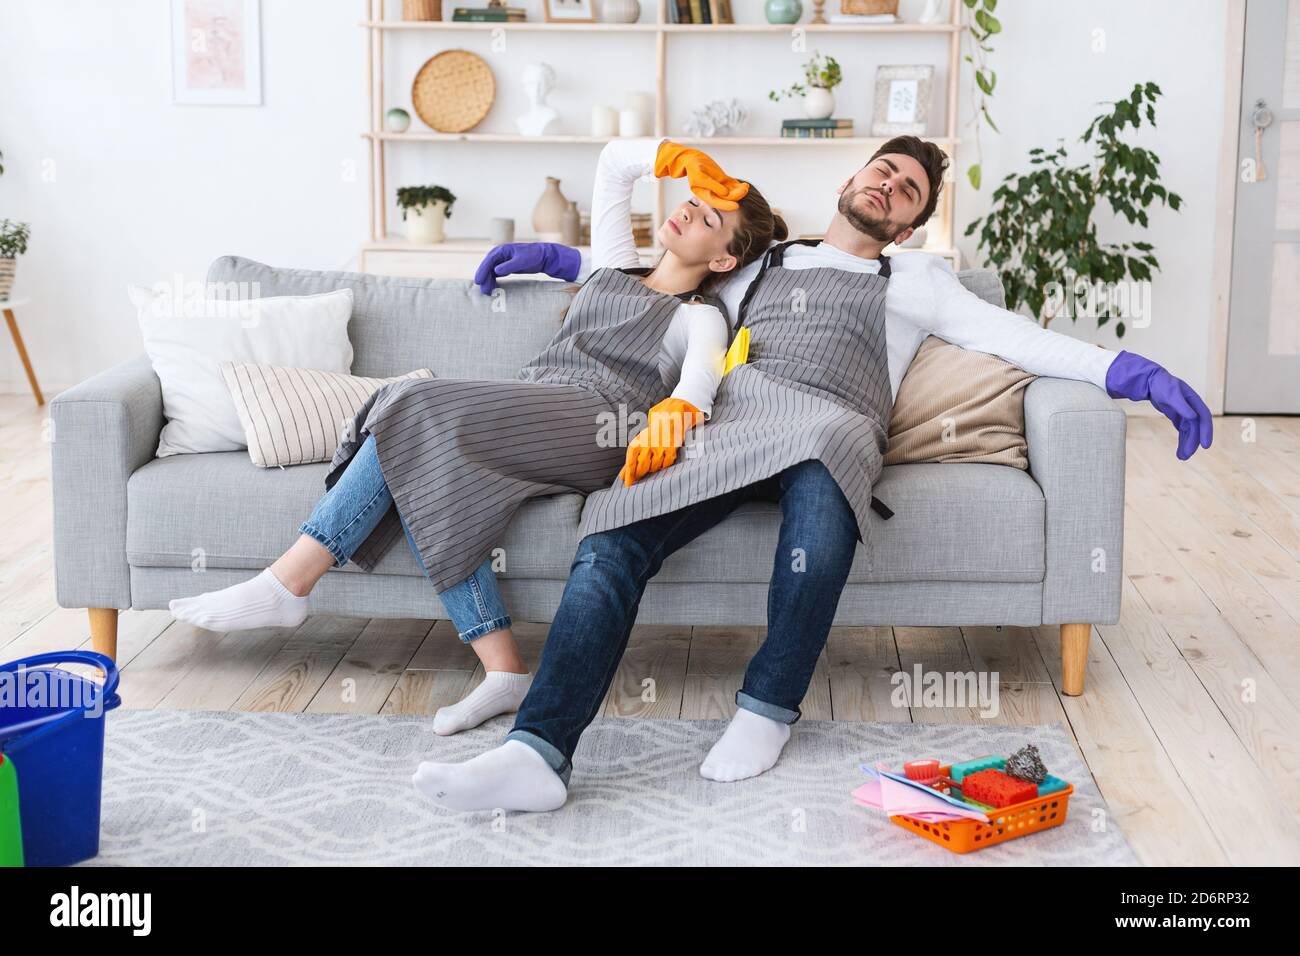 Fatigue after cleaning house during self-isolation covid-19 Stock Photo